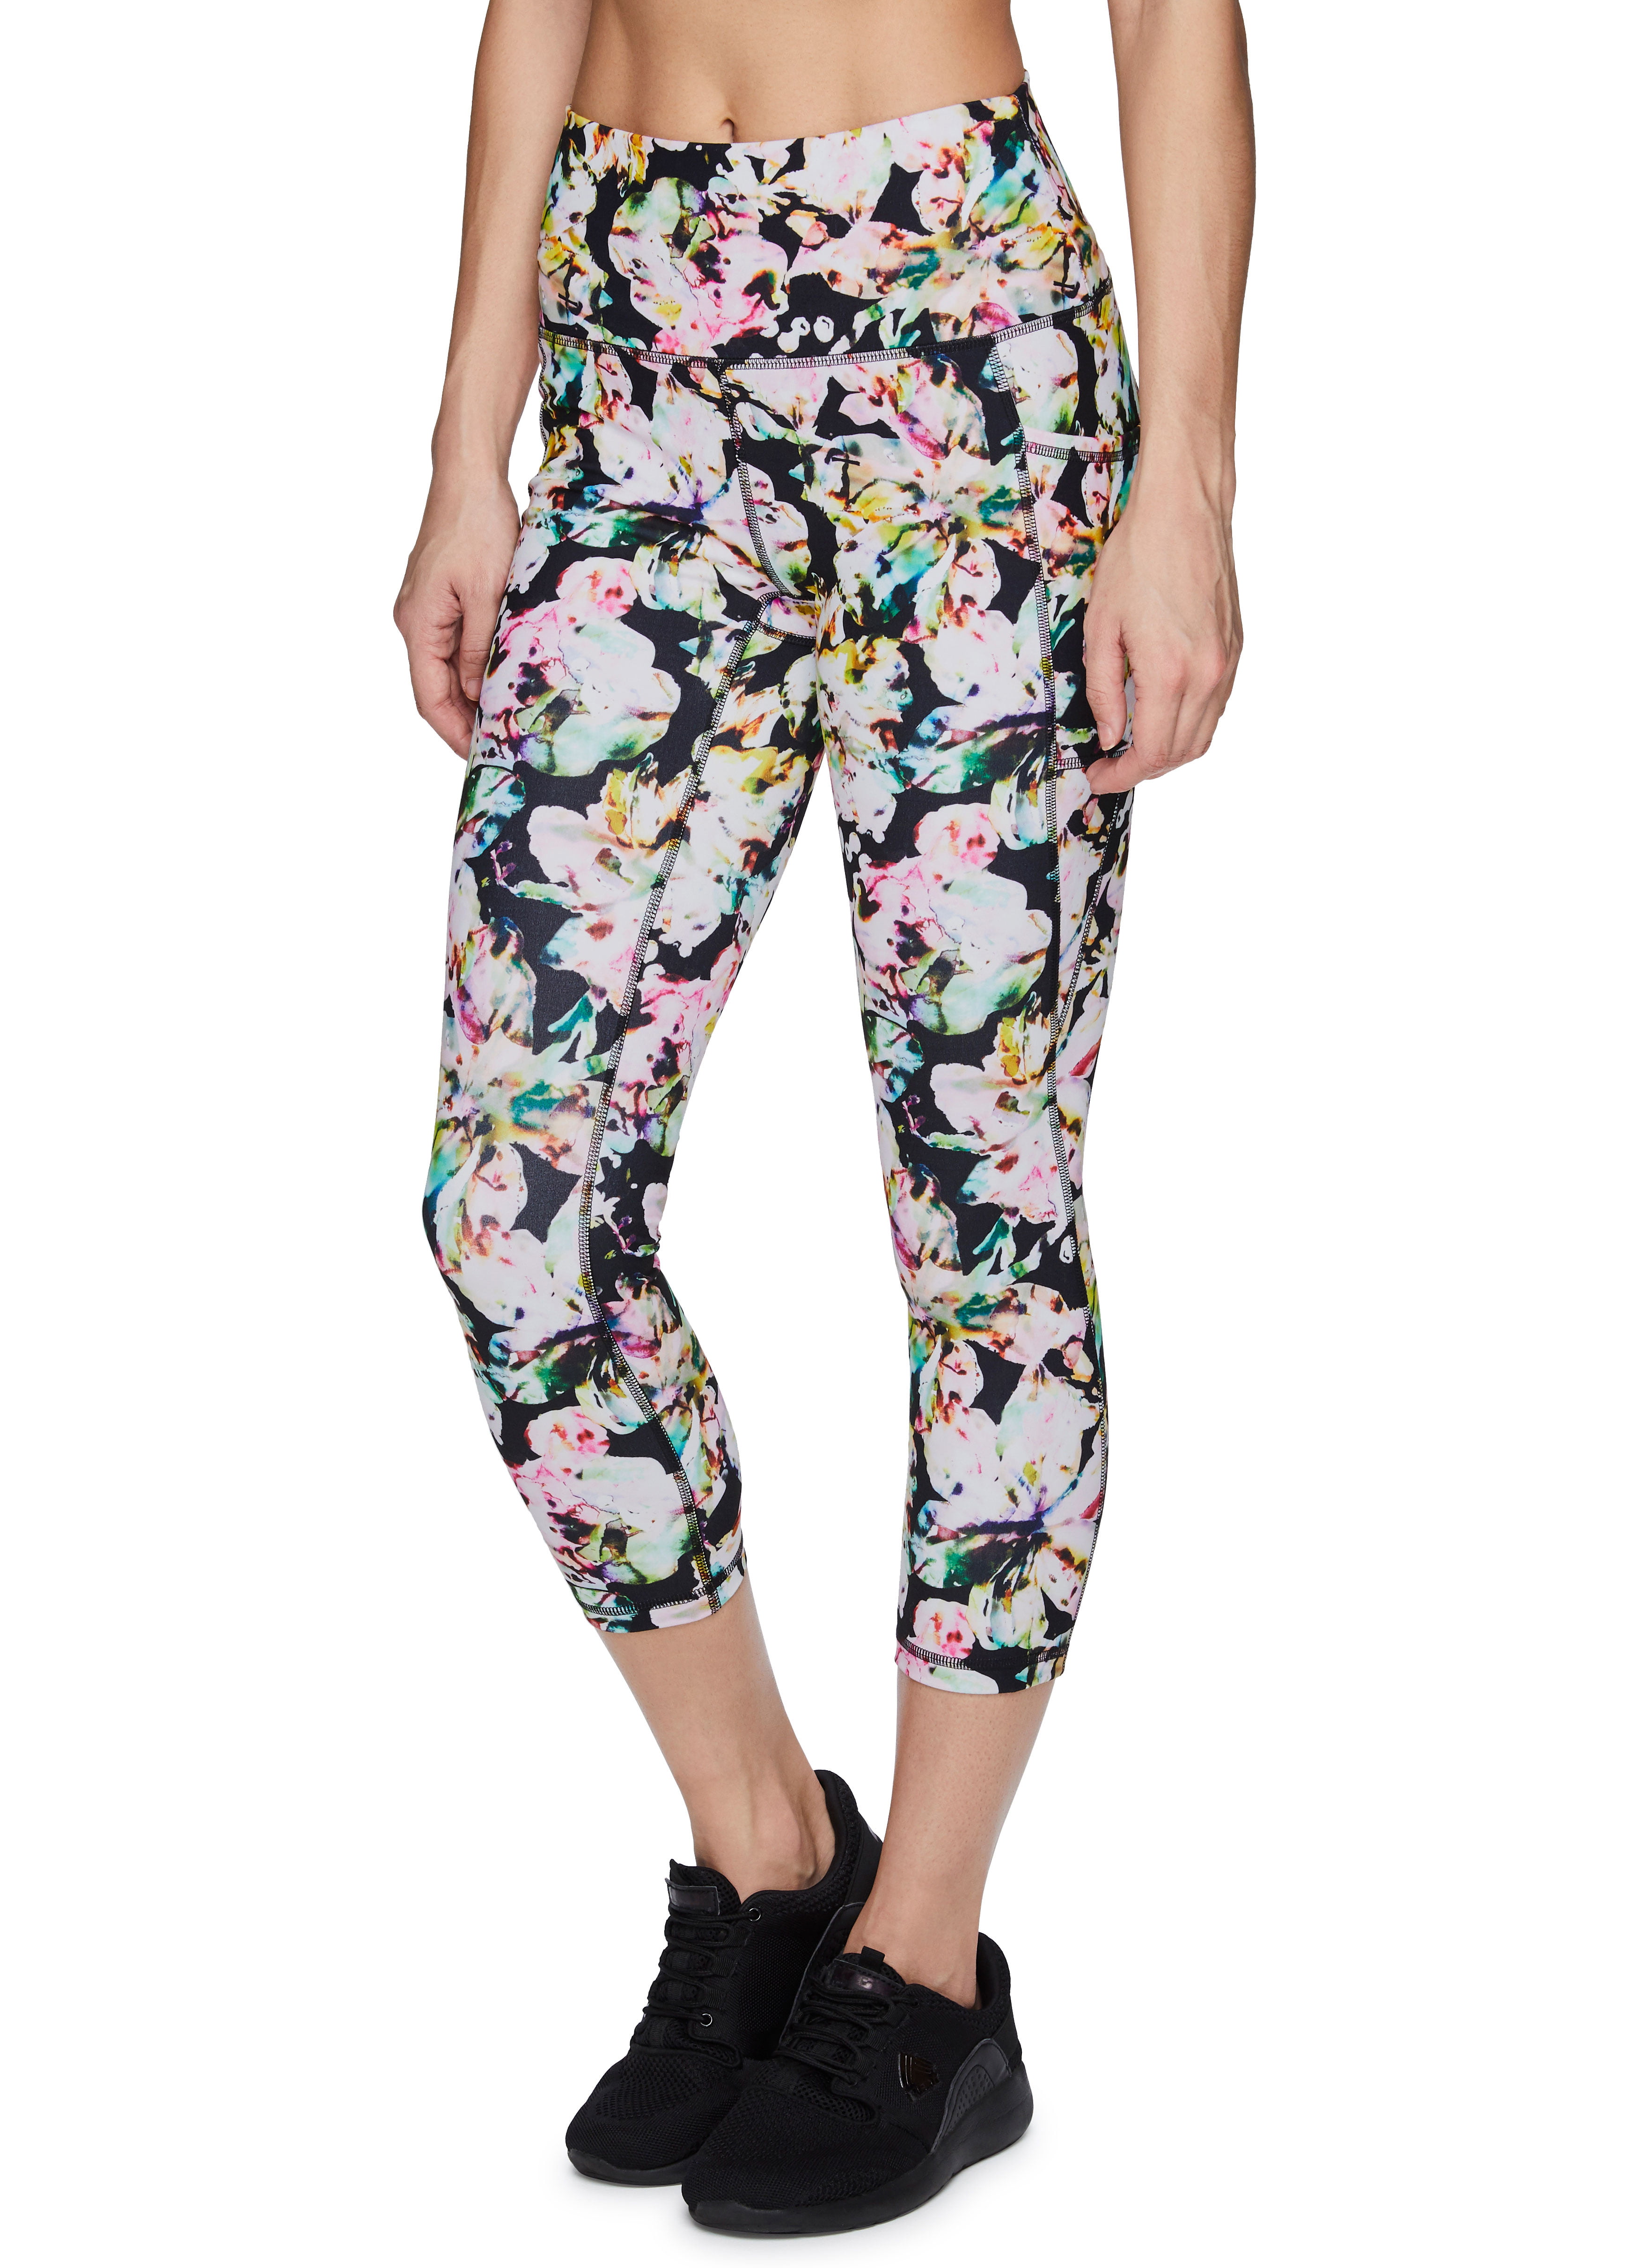 Online Limited Product RBX Black And Pink Floral High Waist Capri Leggings Avidiot Ir